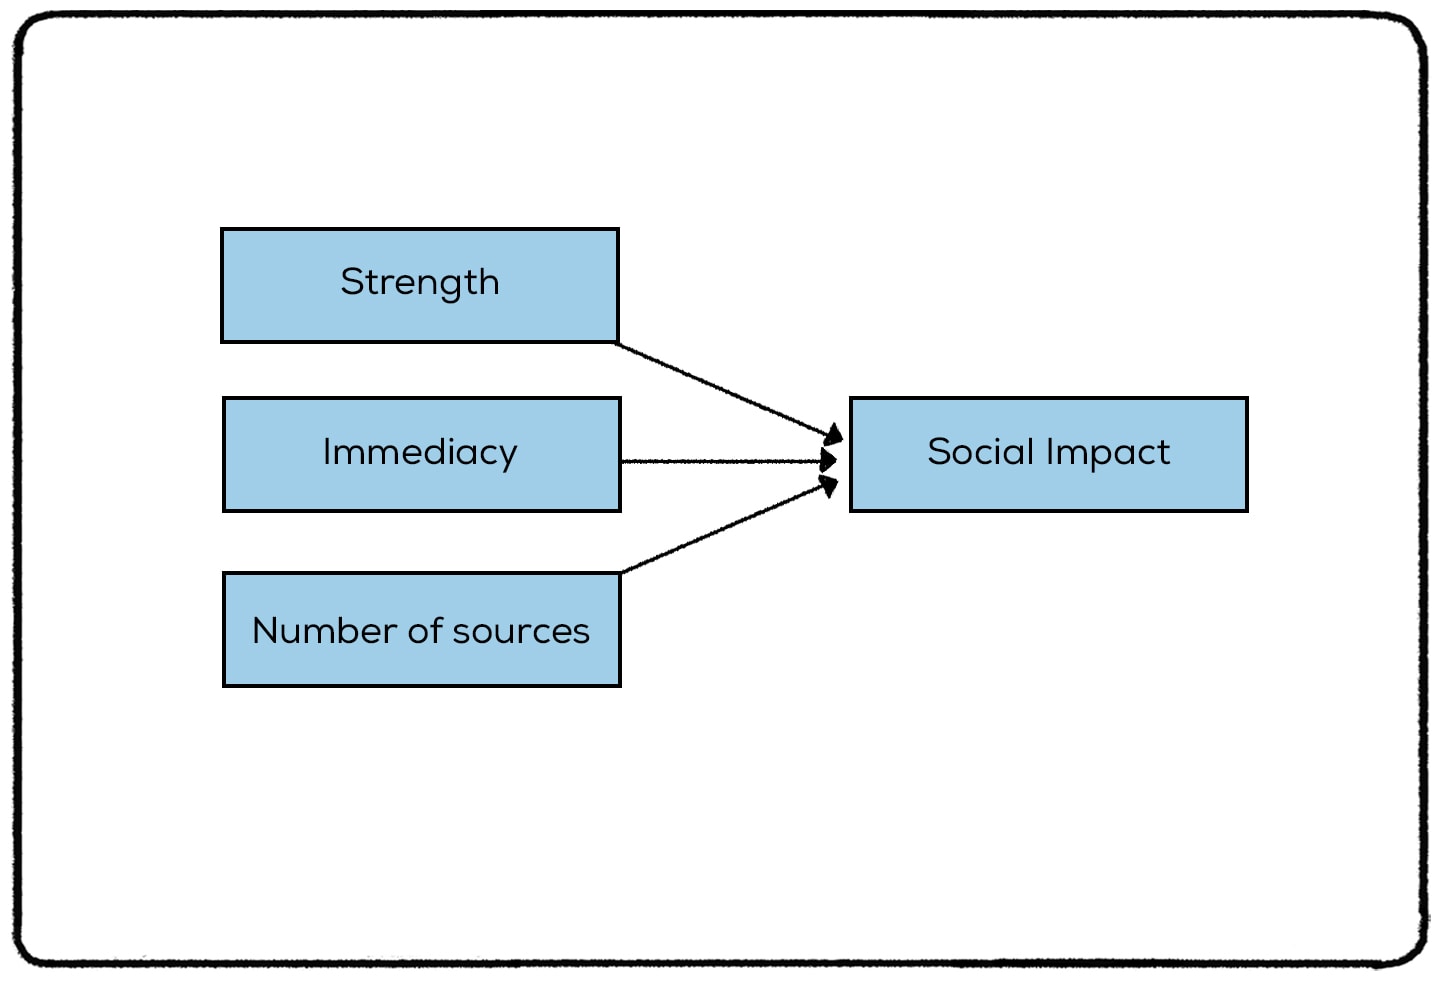 chart displaying three elements of social impact theory: strength, immediacy, and number of sources 